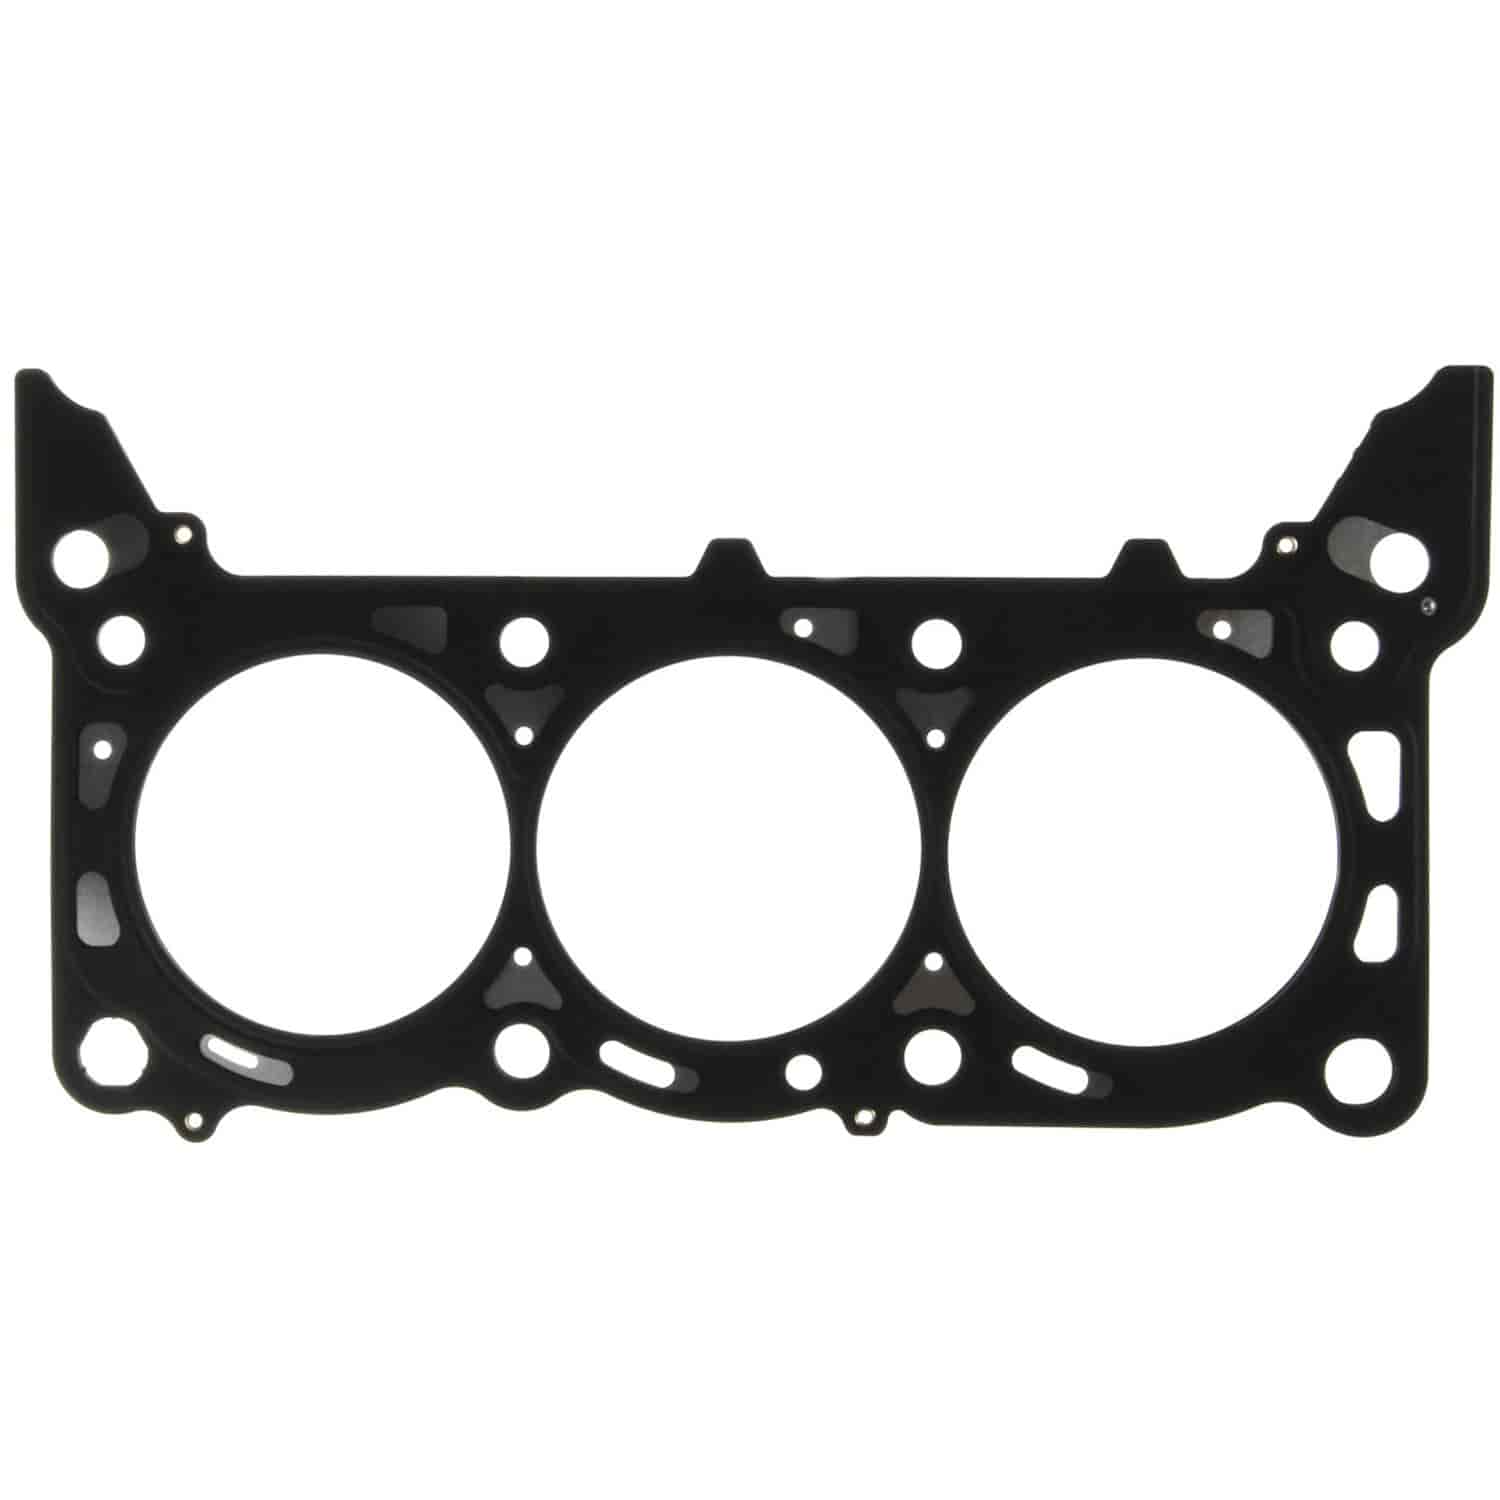 Cylinder Head Gasket Right Ford Products V6 3.8L Mustang 1999-00 Windstar 1997-99 Ford Truck V6 4.2L